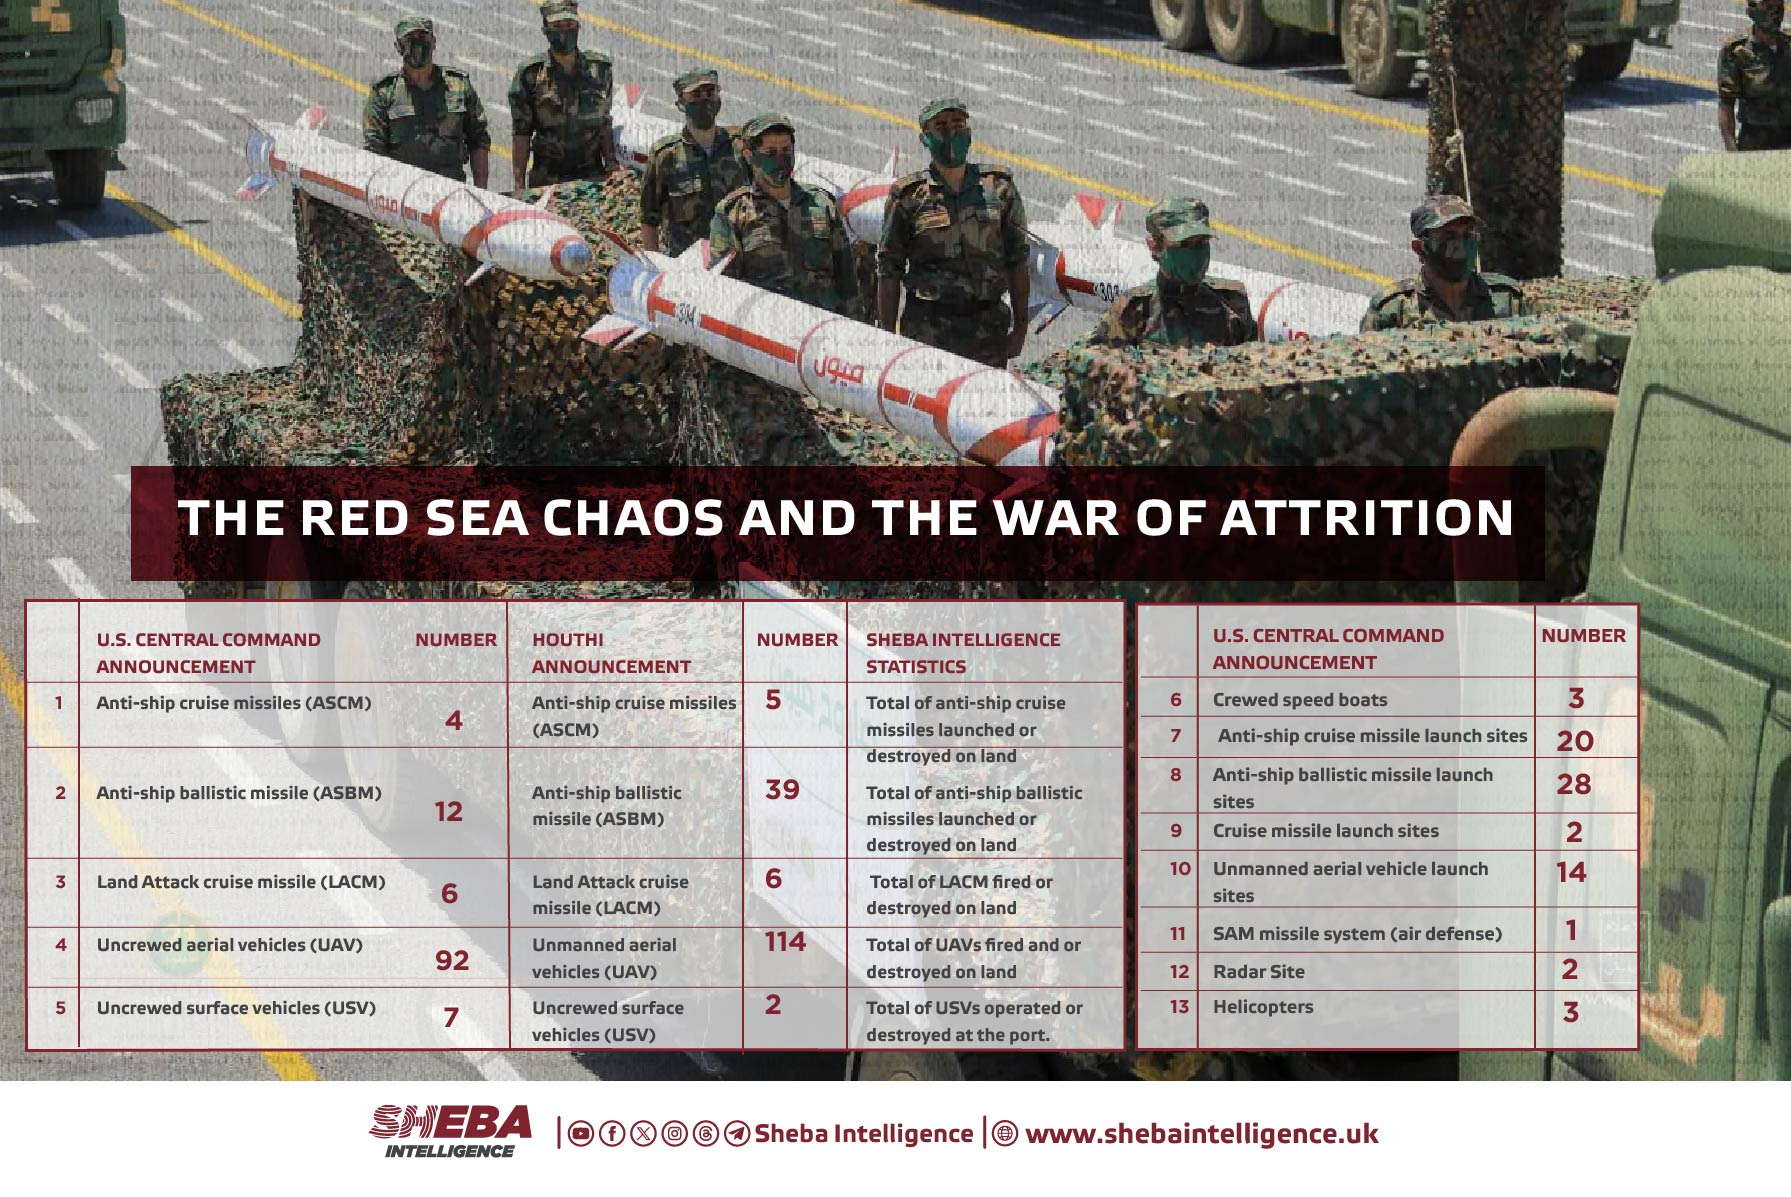 The Red Sea Chaos and the War of Attrition